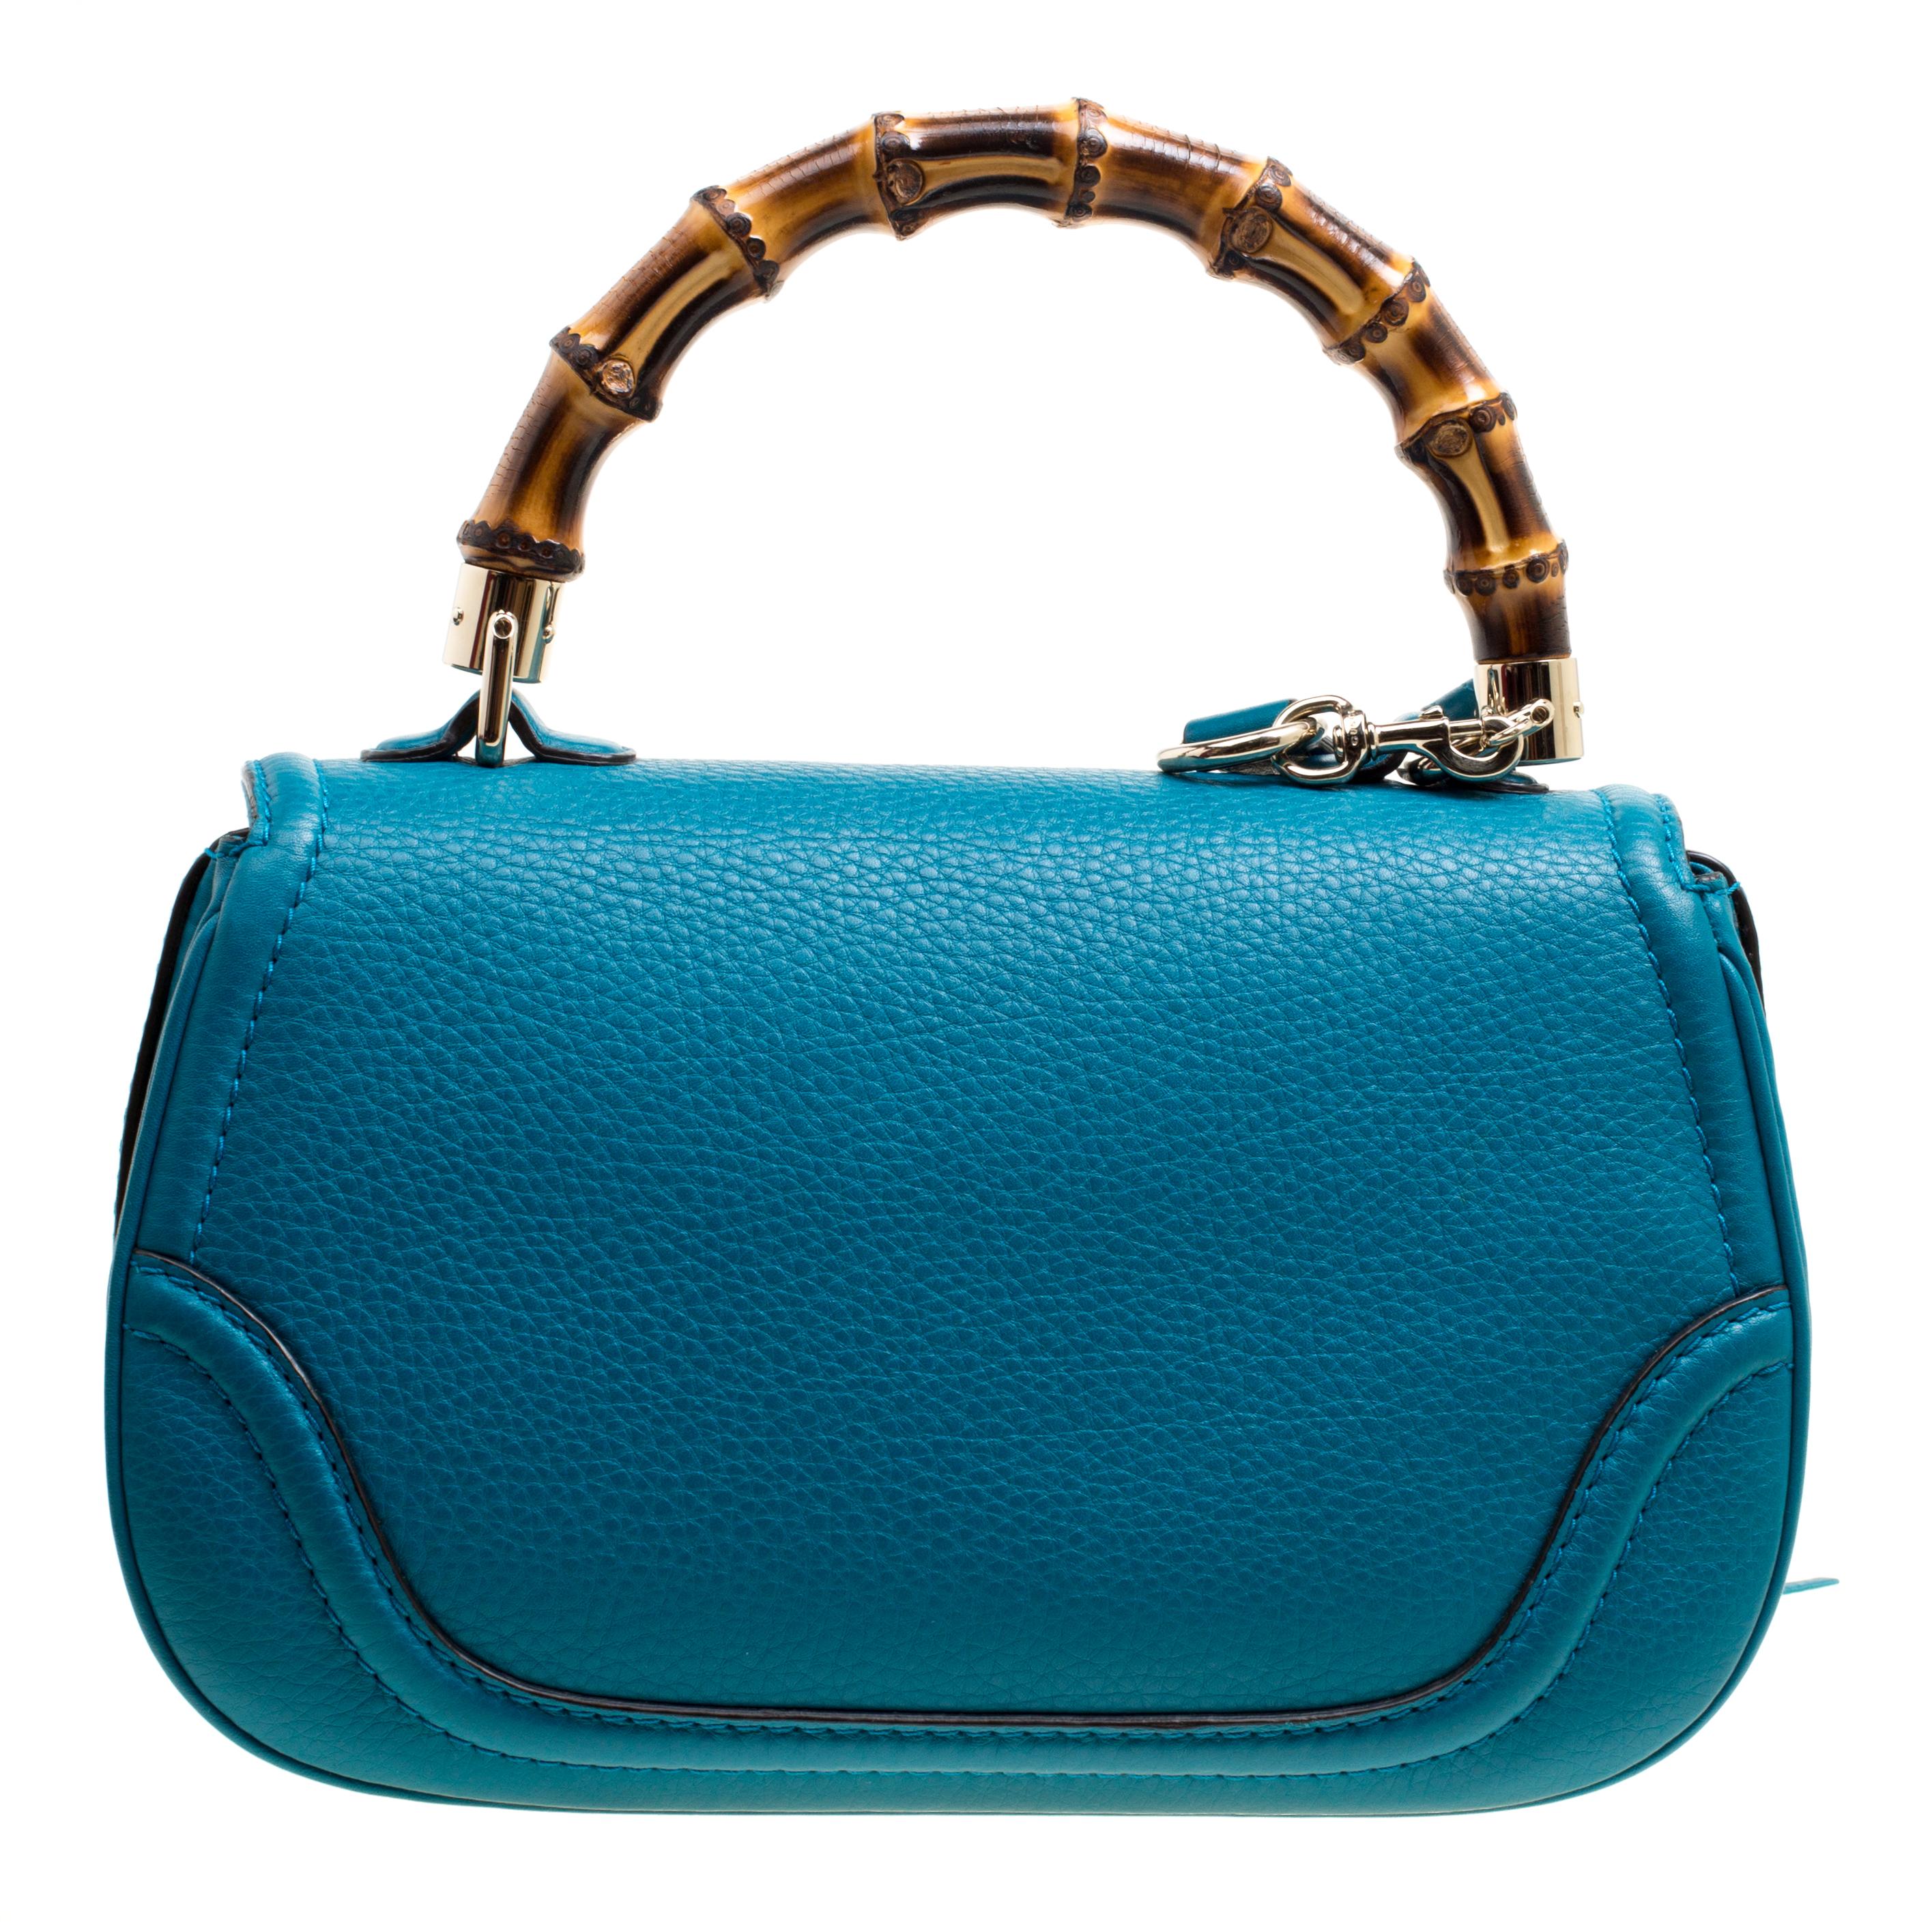 Women's Gucci Teal Blue Leather Tassel New Bamboo Top Handle Bag